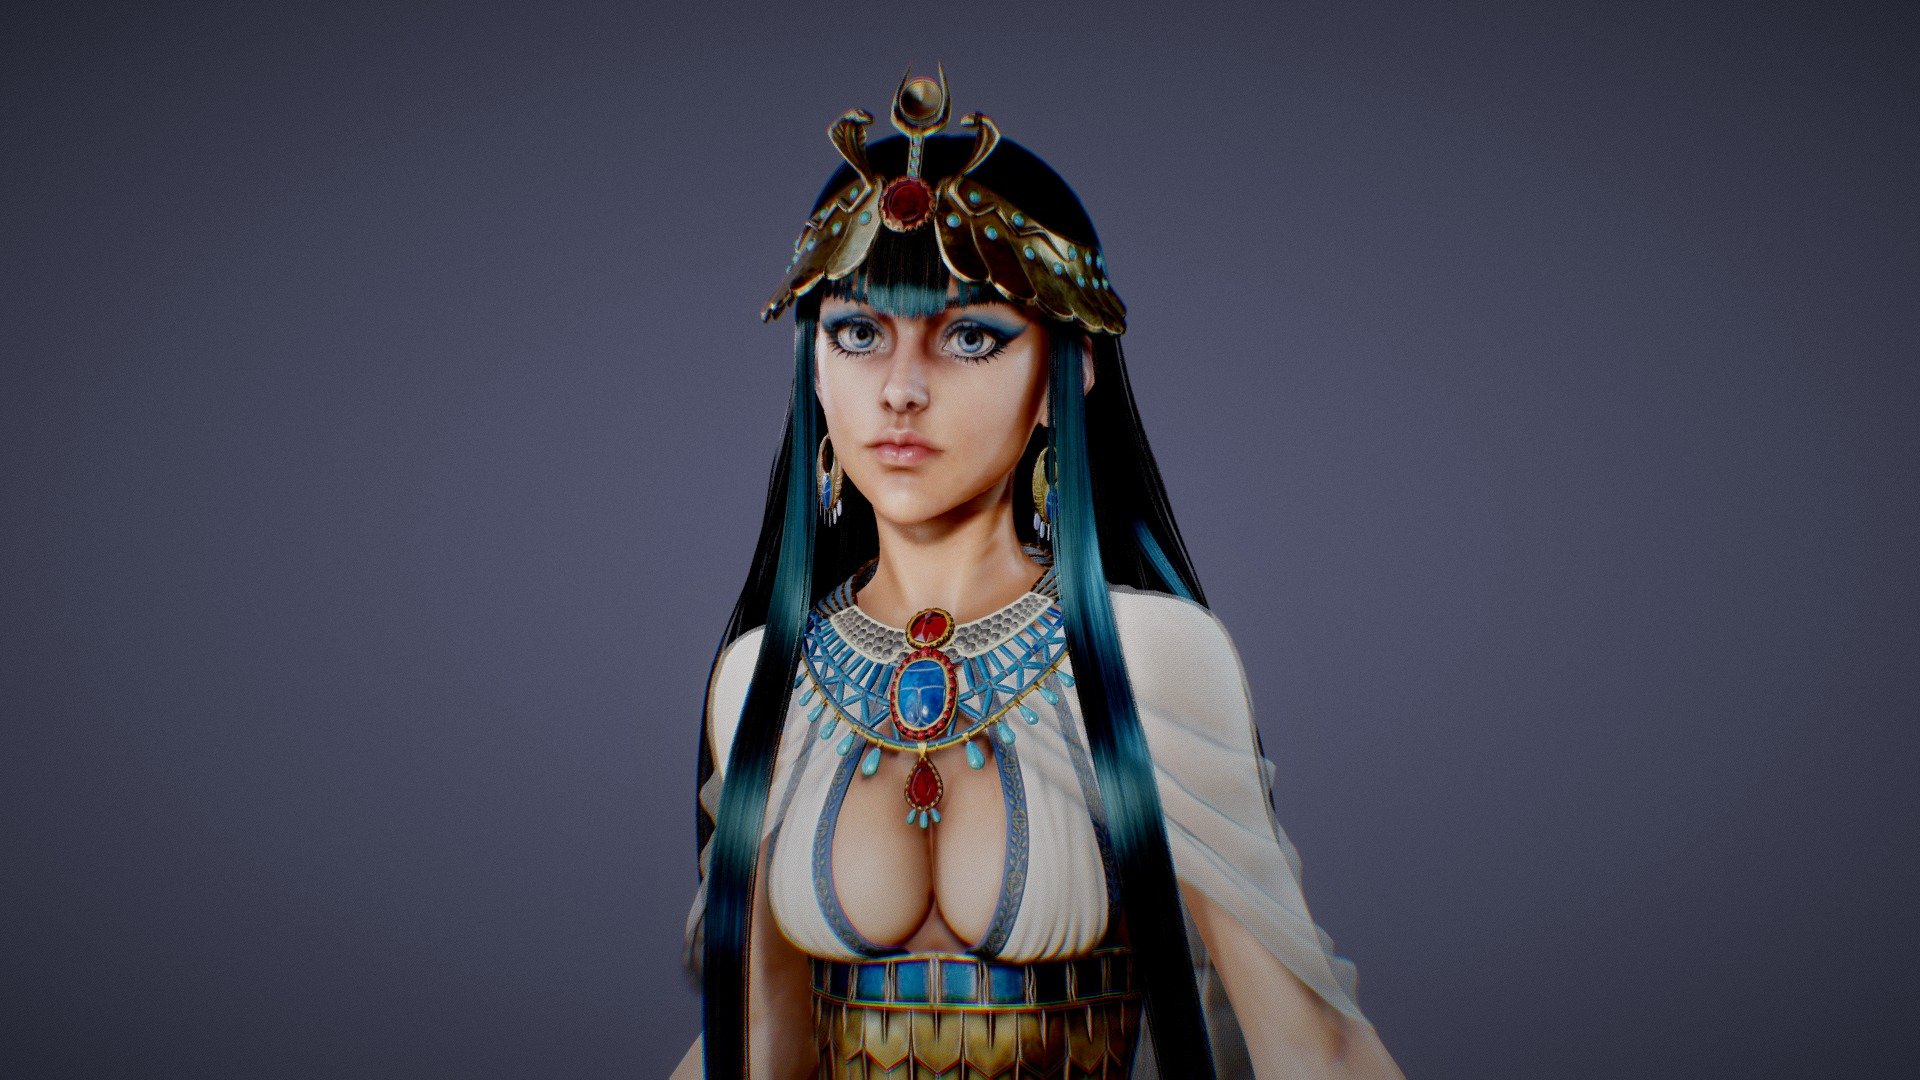 Personal project, the queen Hatshepsut from Chie INUDOH's manga &ldquo;The Blue Eye of Horus